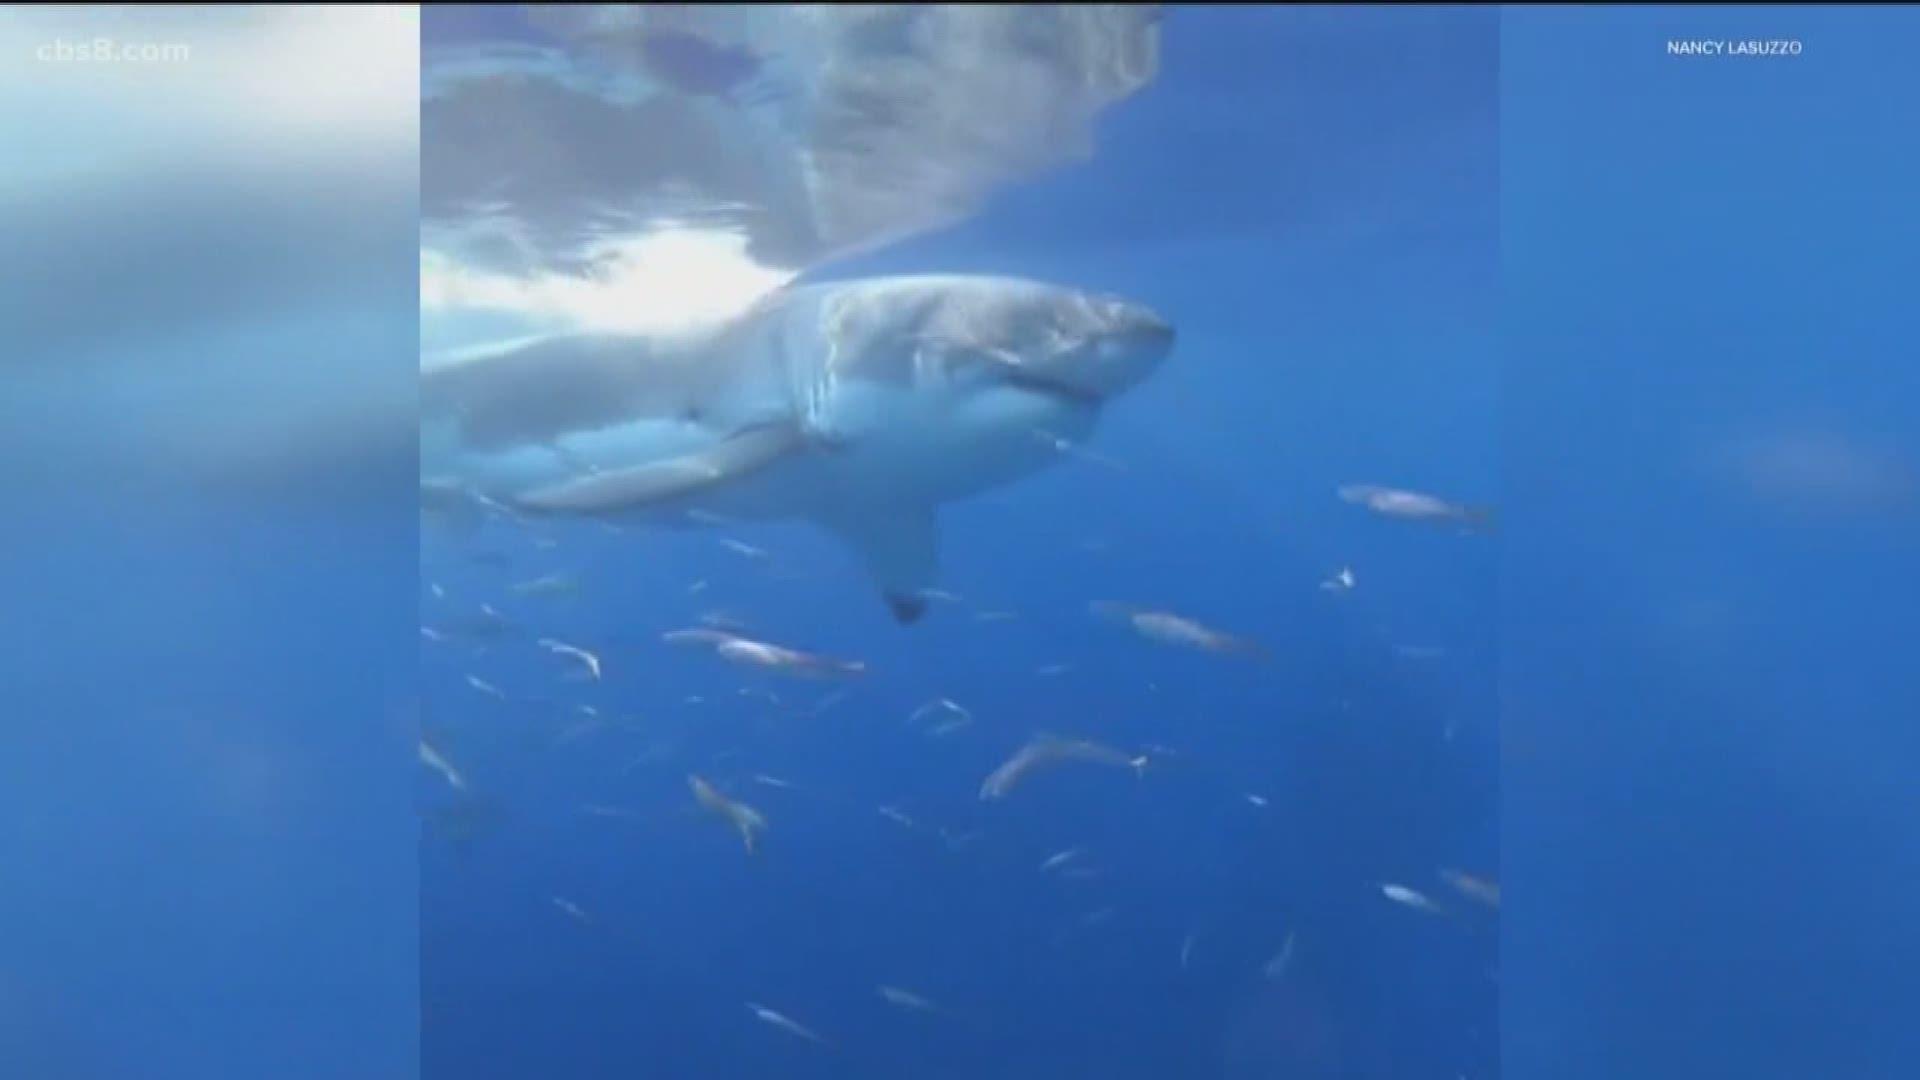 A shark diving tour group out of San Diego came face to face last Saturday with a 17-foot great white shark as it took a big bite out of their cage.